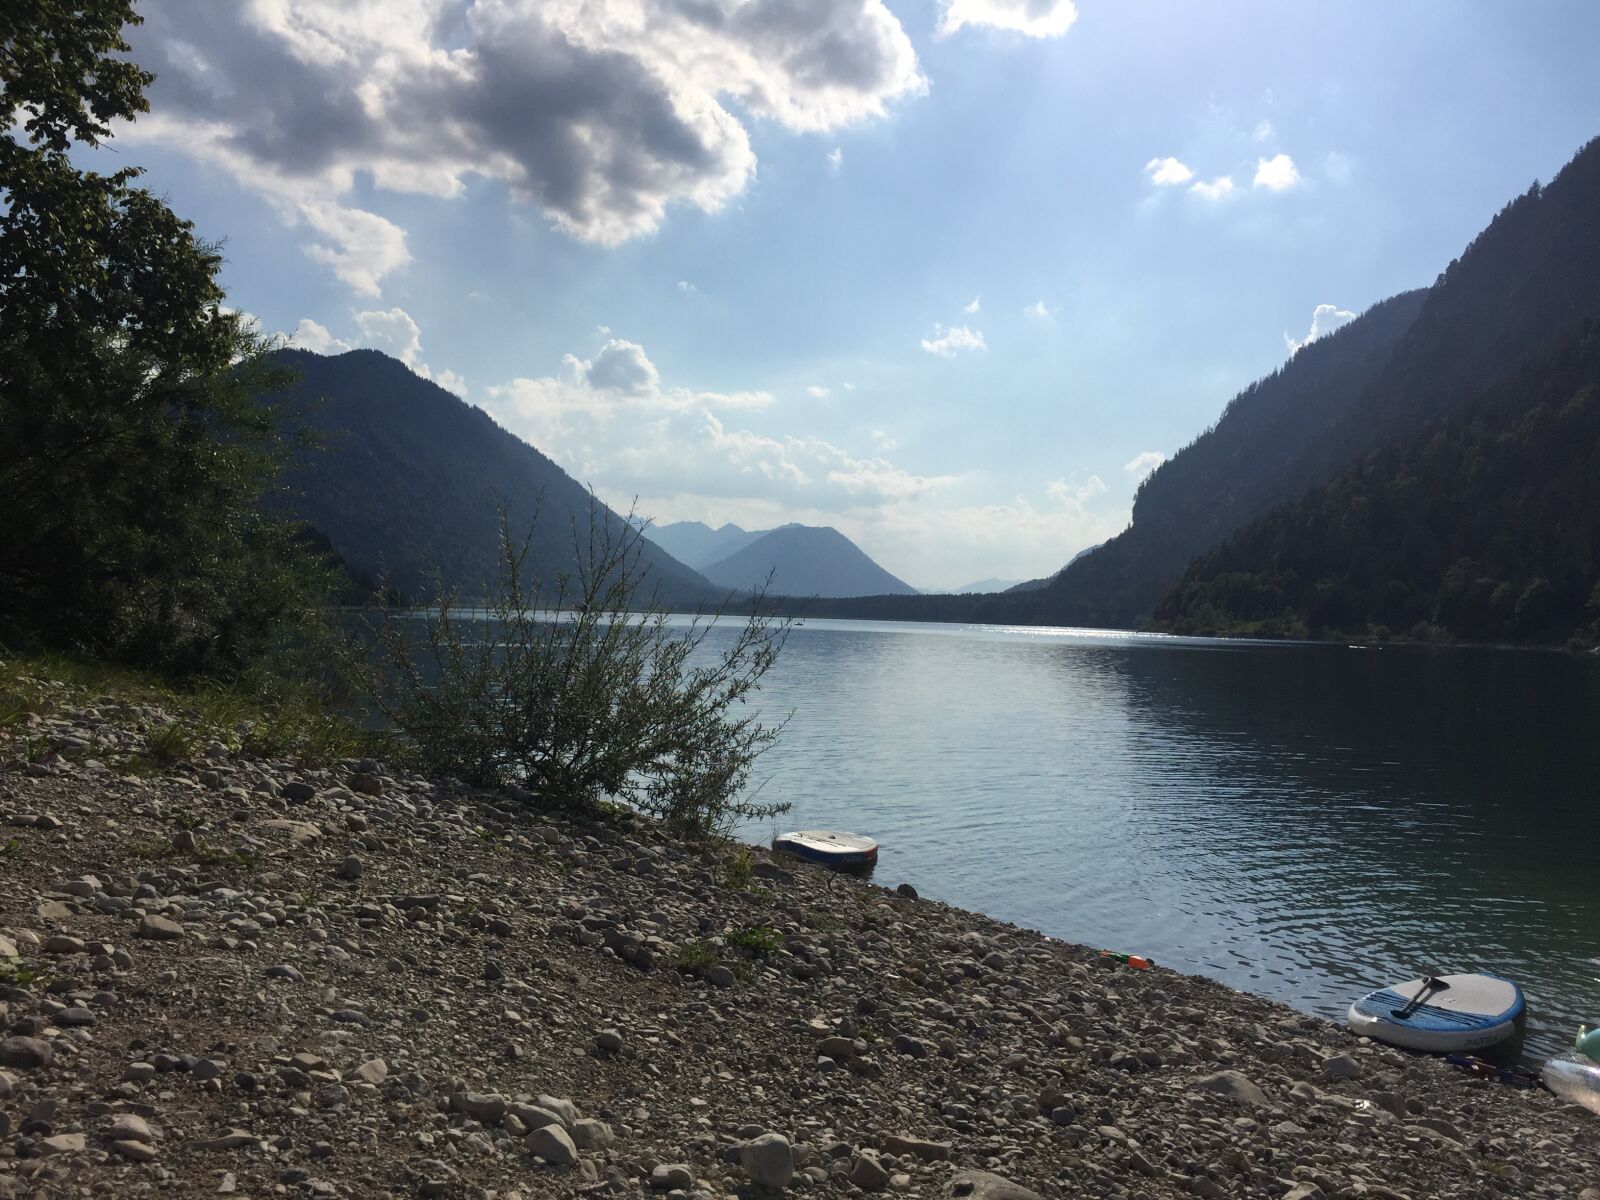 Apple iPhone 6 Plus sample photo. Sylvensteinsee, sylvenstein, bad t photography